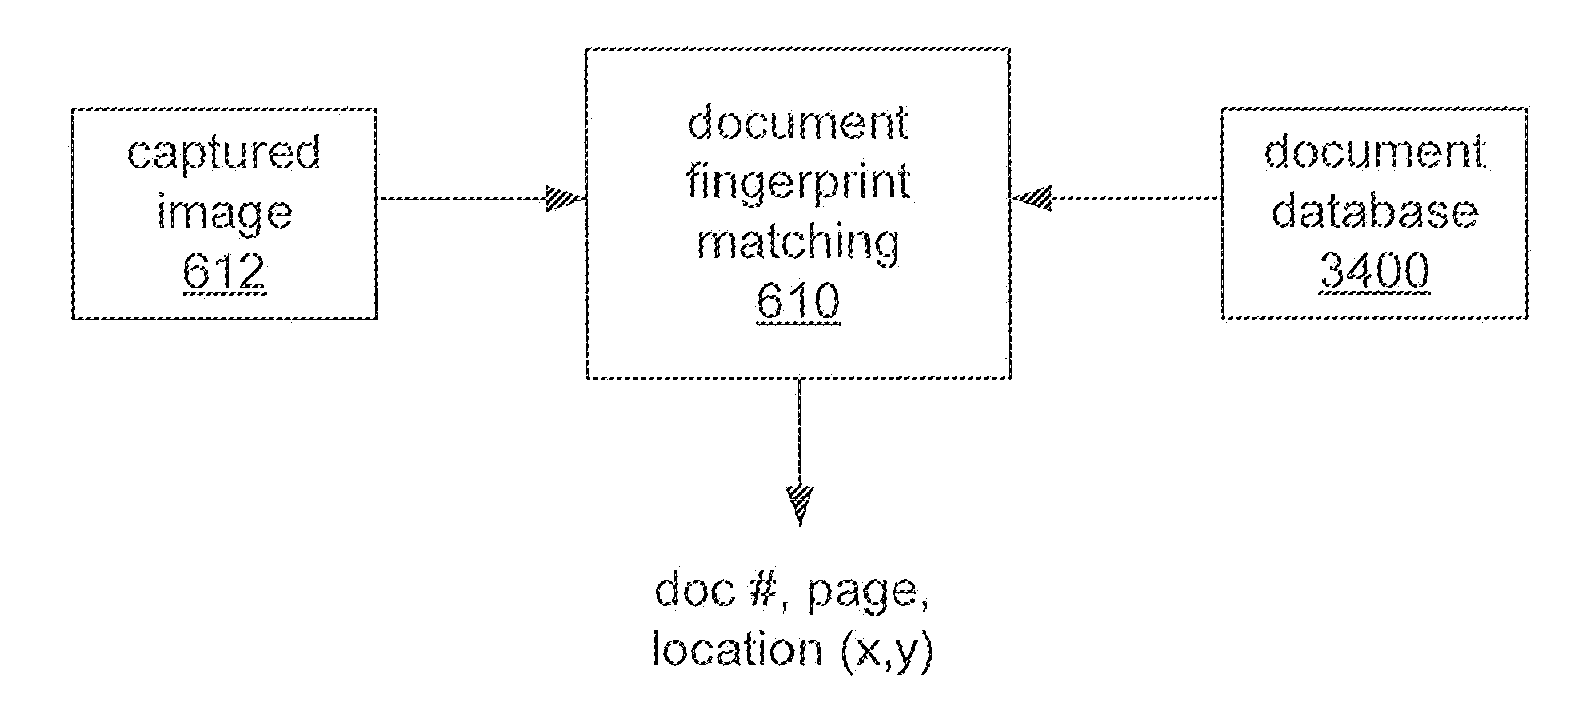 System and Method for Using Individualized Mixed Document